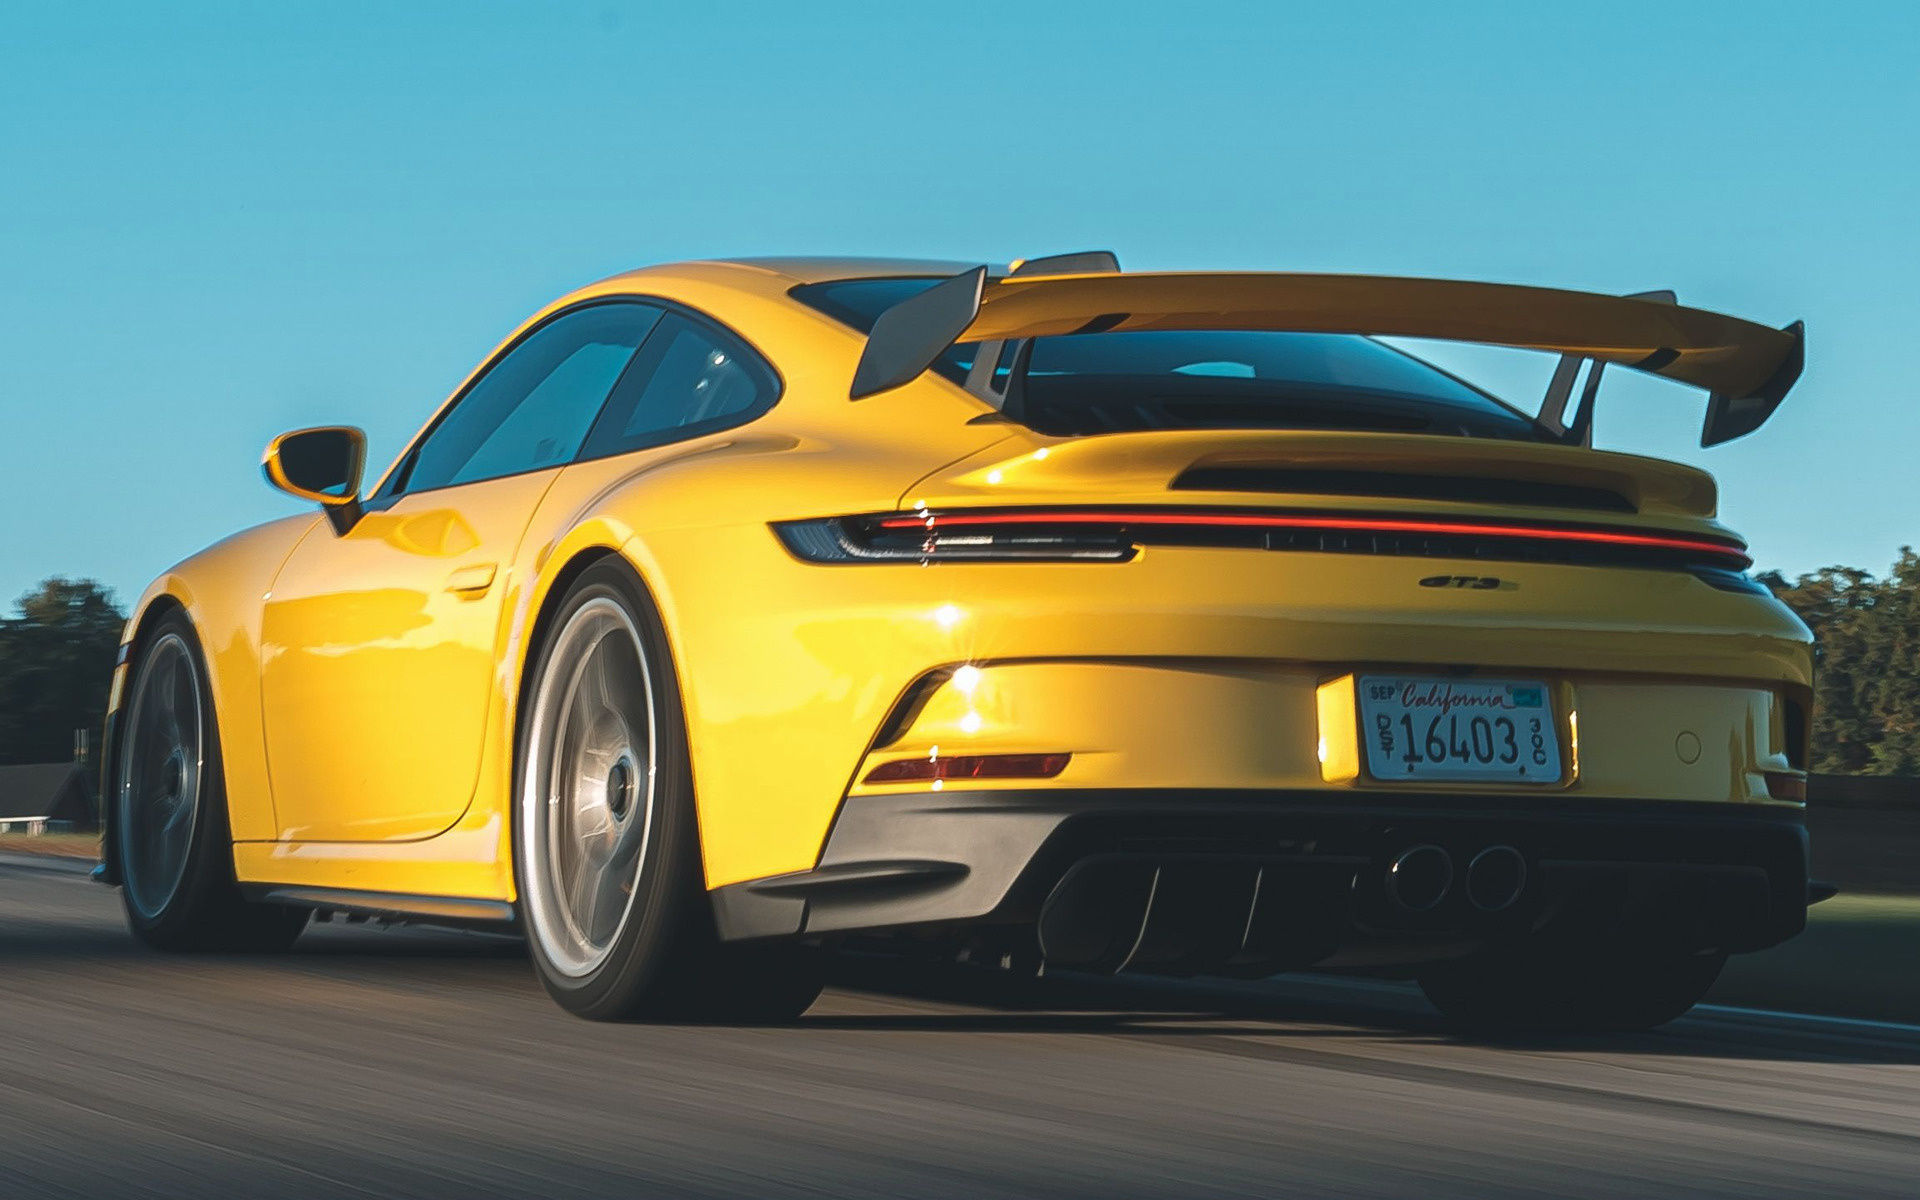 2022 Porsche 911 GT3 (US) and HD Image